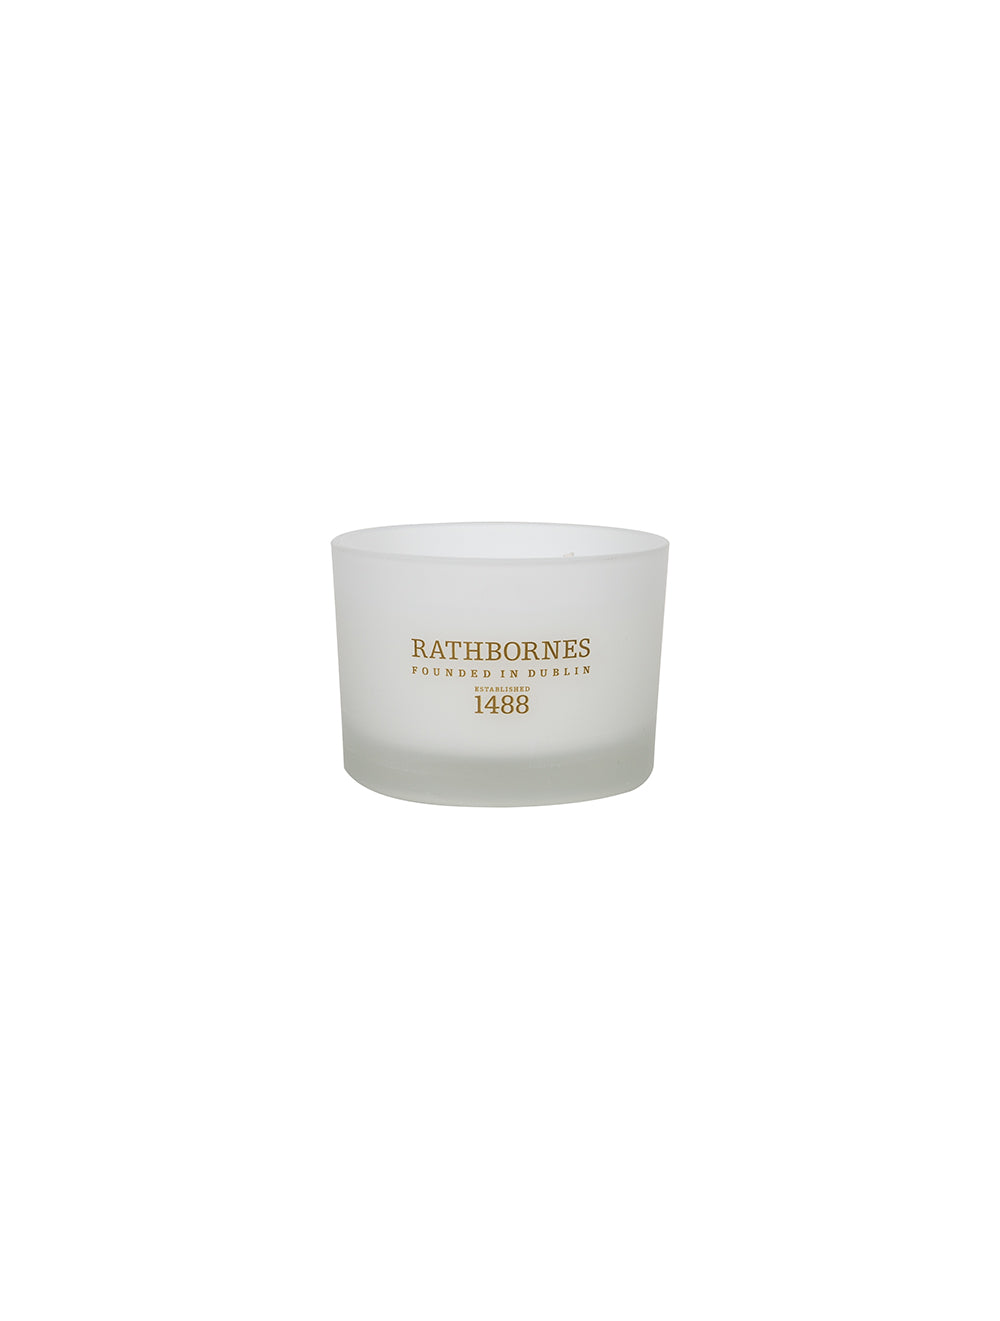 RATHBORNES Rosemary, Fougere & Camphor Classic Candle